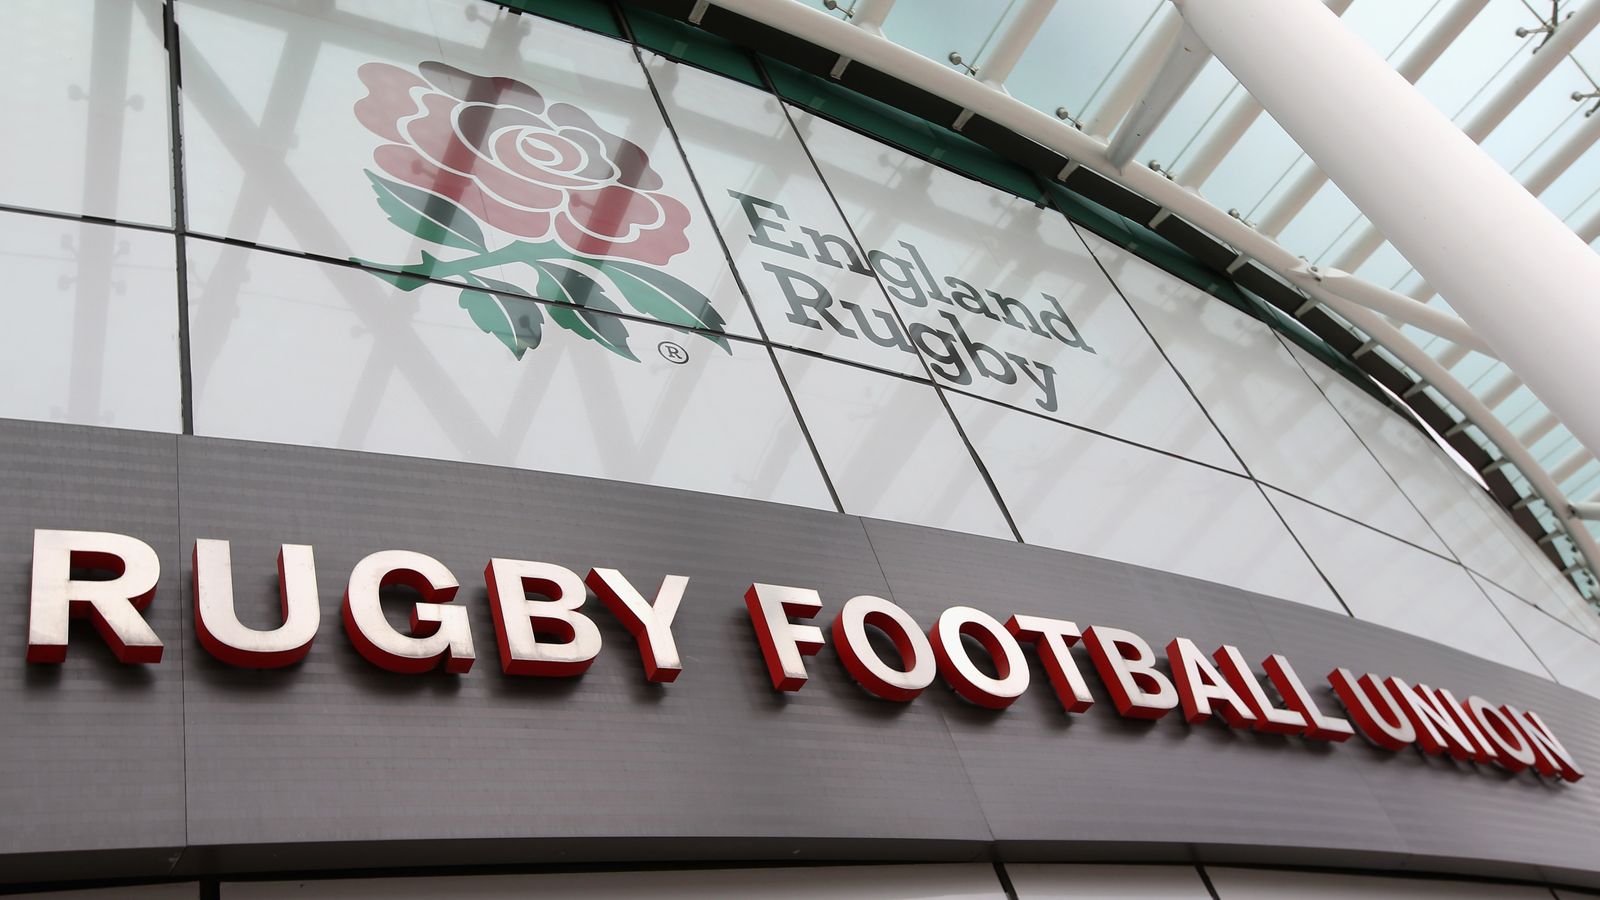 RFU, Premiership Rugby seek government bailouts as spectator return plans put on hold